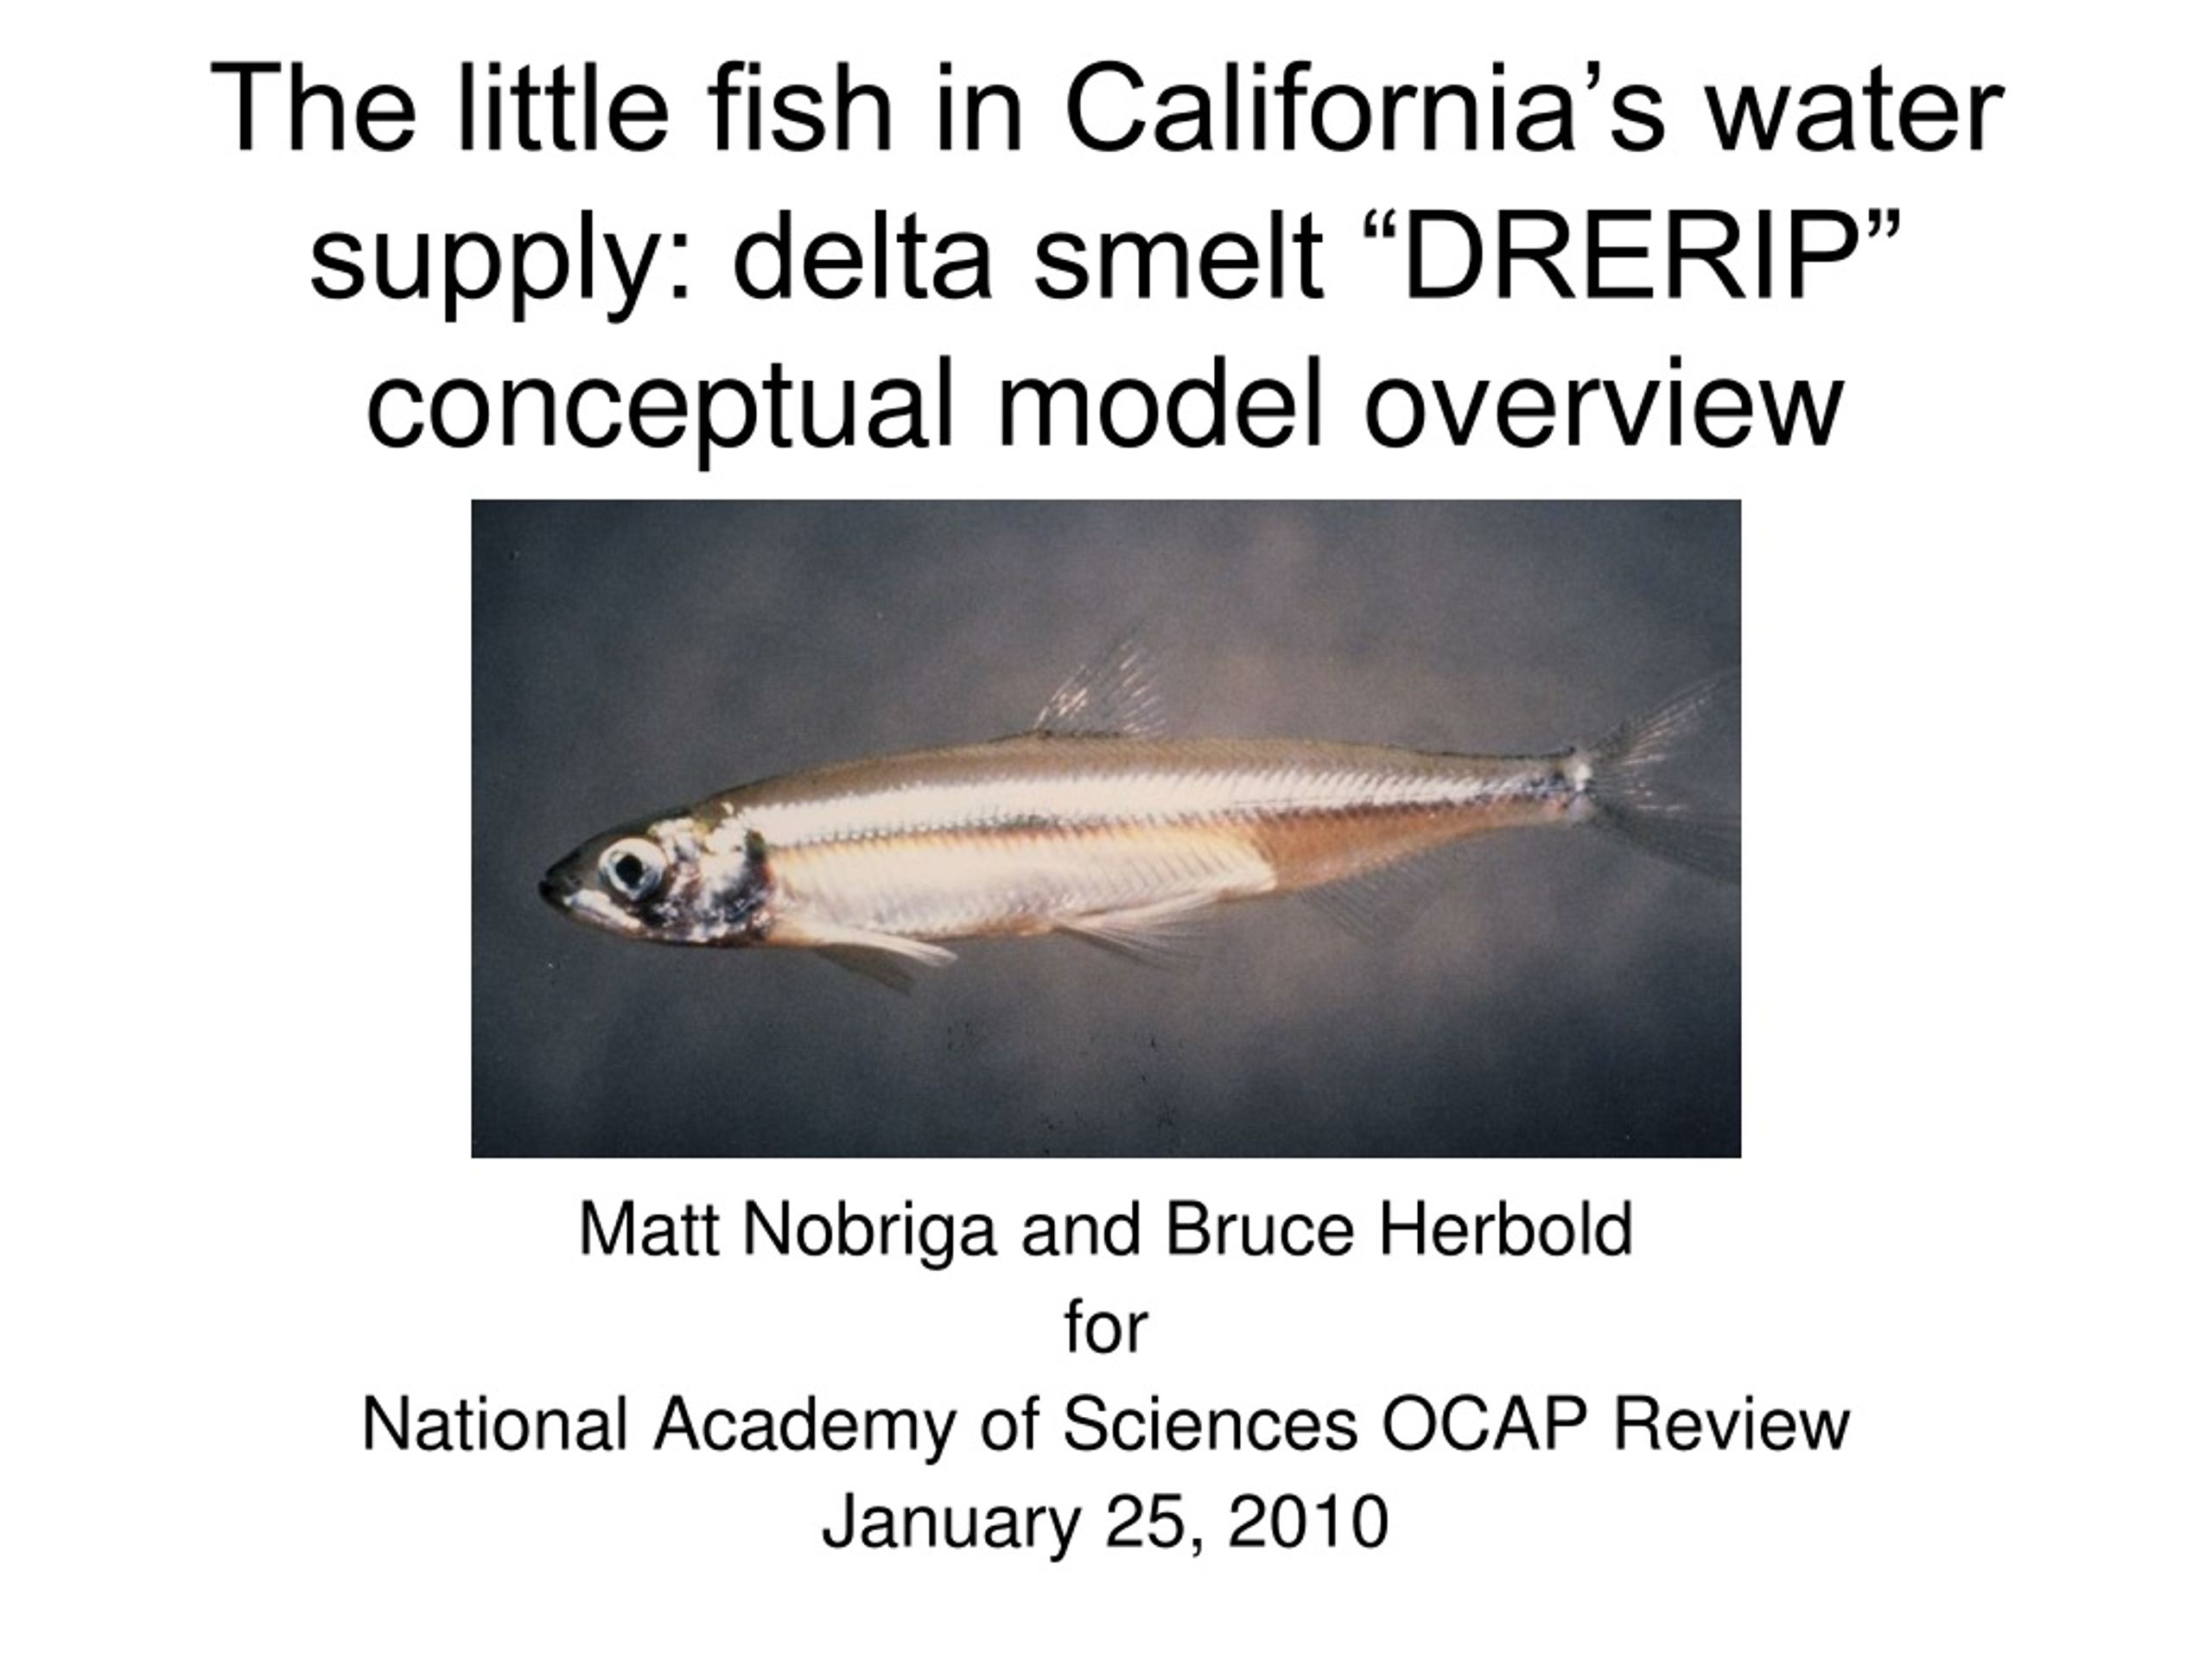 PPT - The little fish in California's water supply: delta smelt